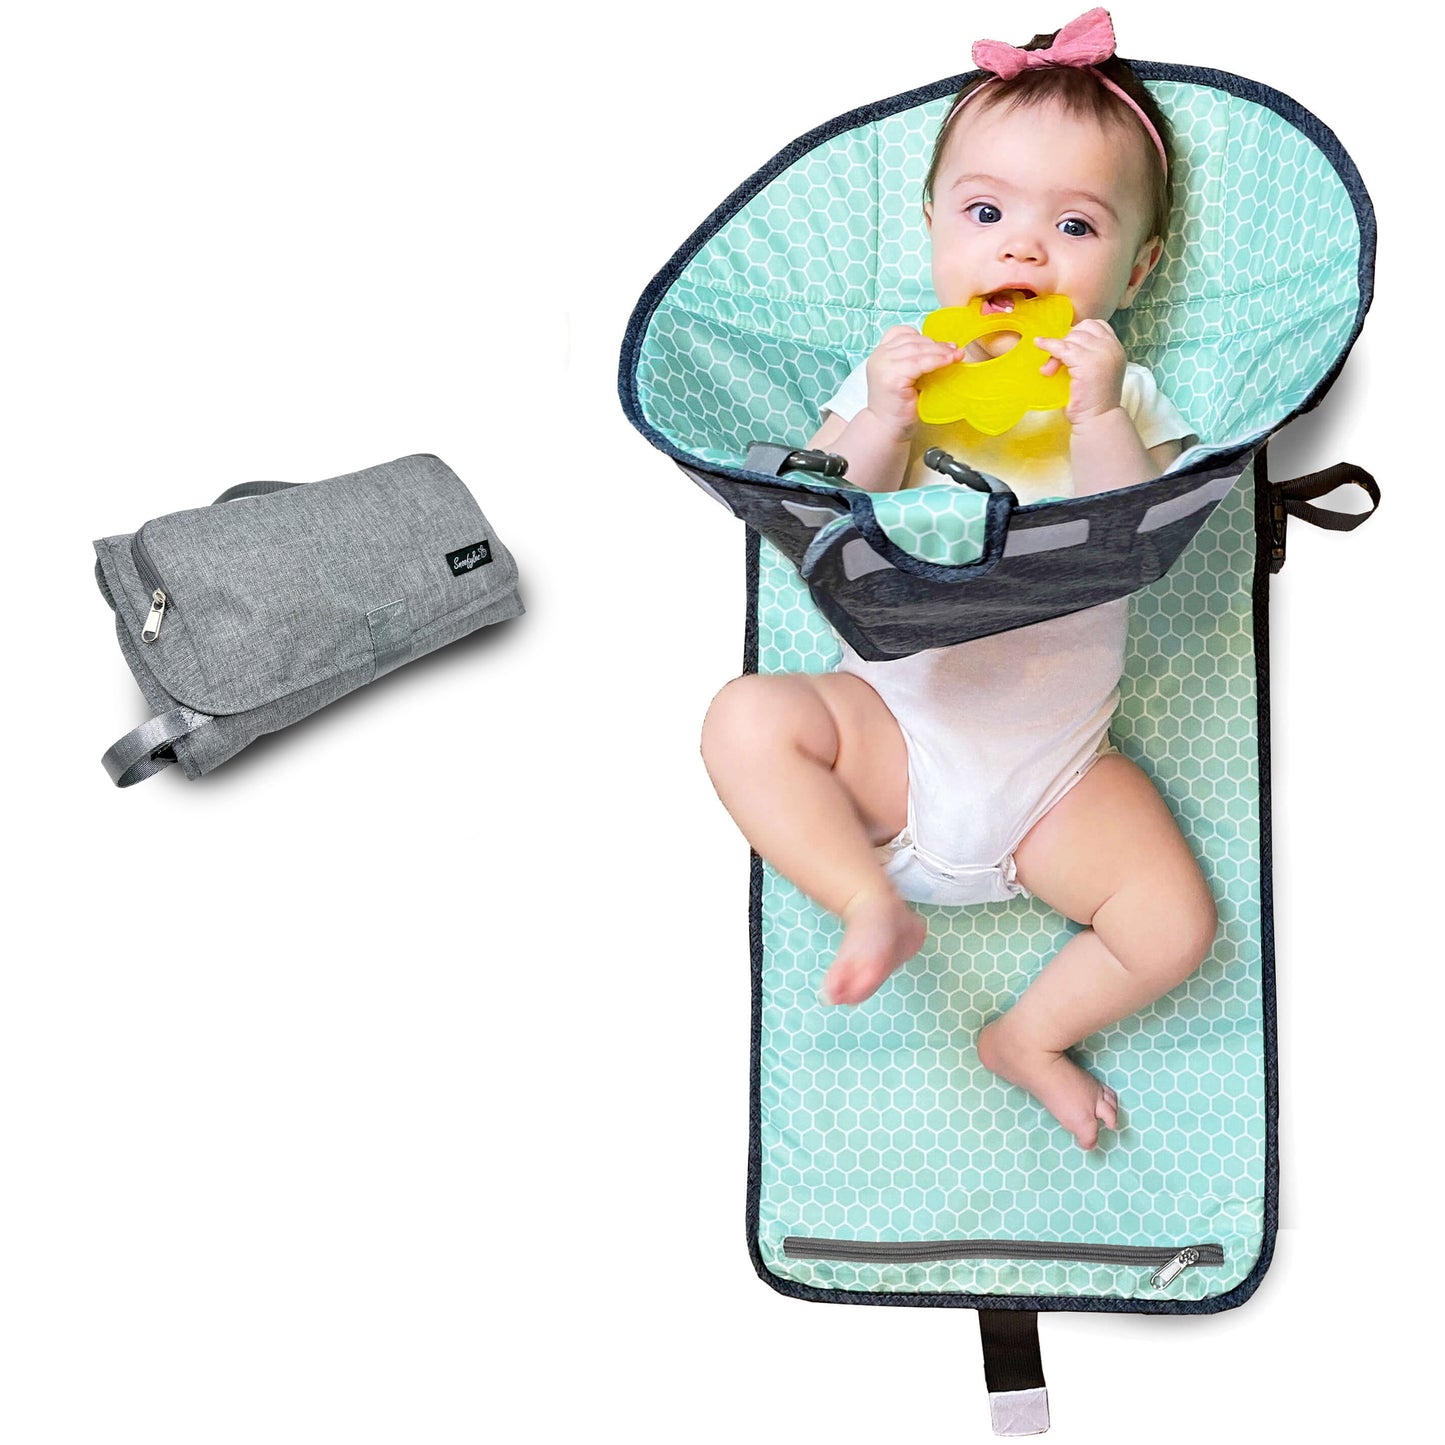 Factory Seconds Sale: Playtime Changing Pad™ - Excursion Edition | Cosmetic Imperfections